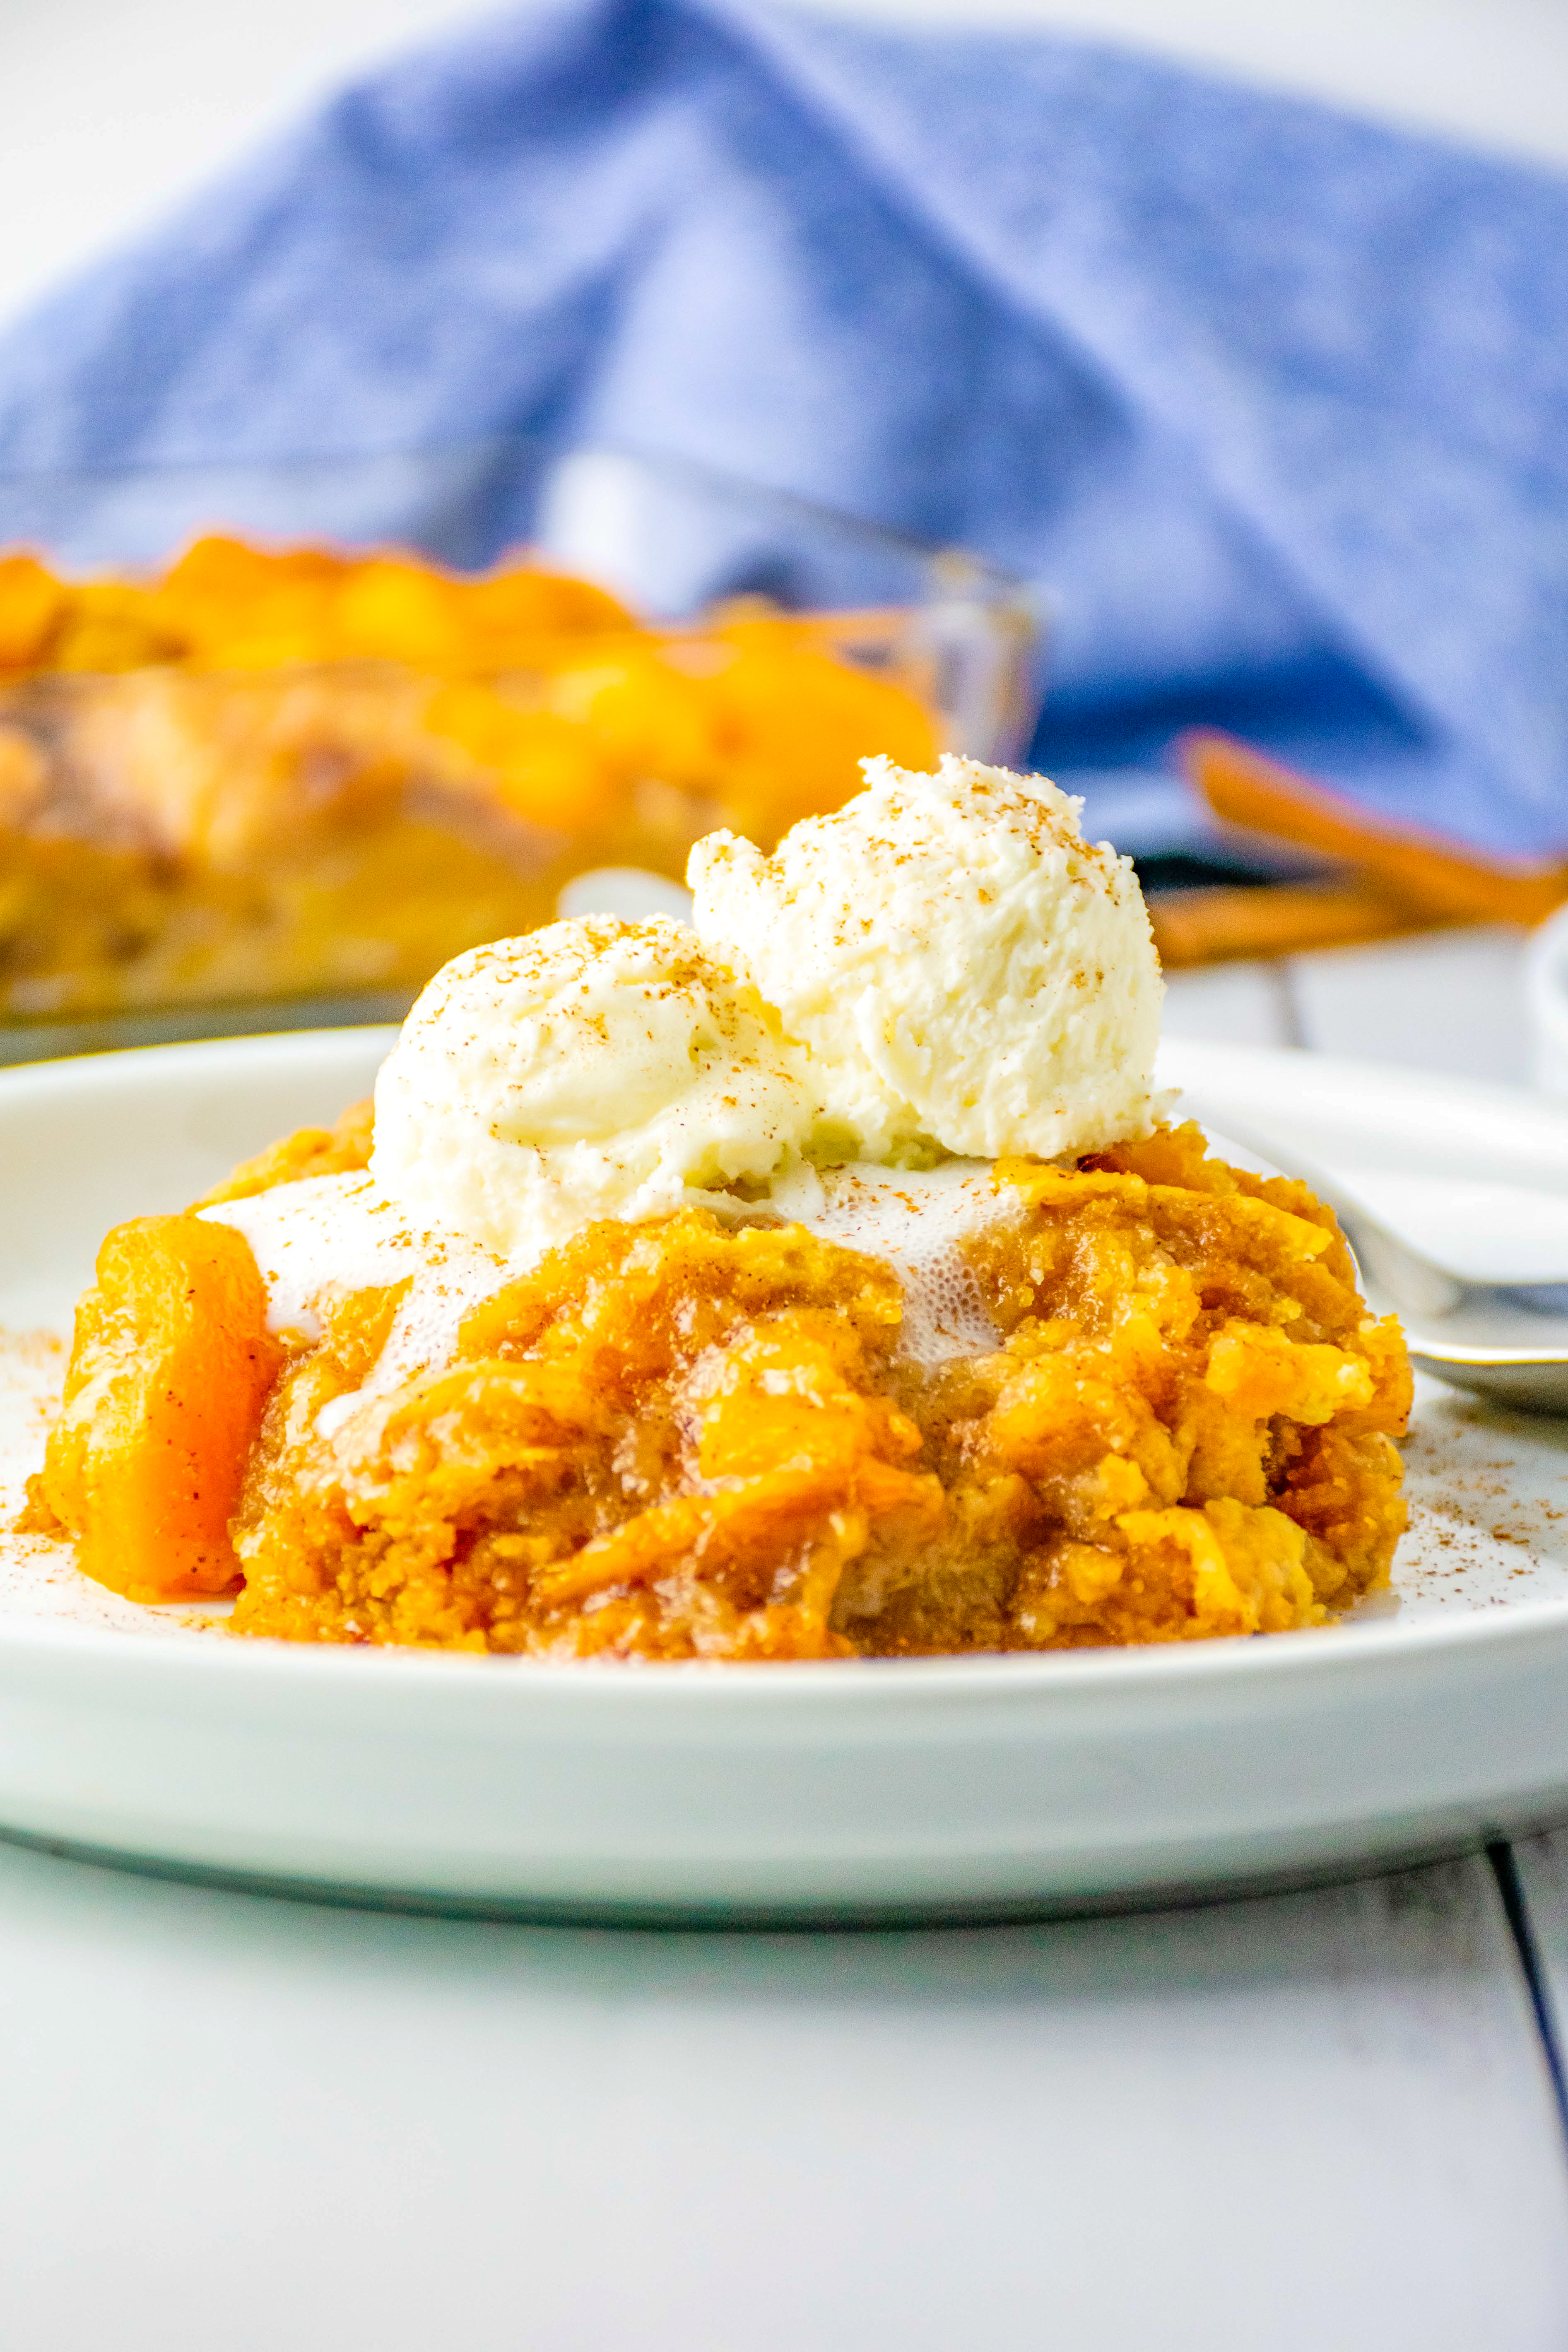 Peach cobbler topped with ice cream in a white dish.